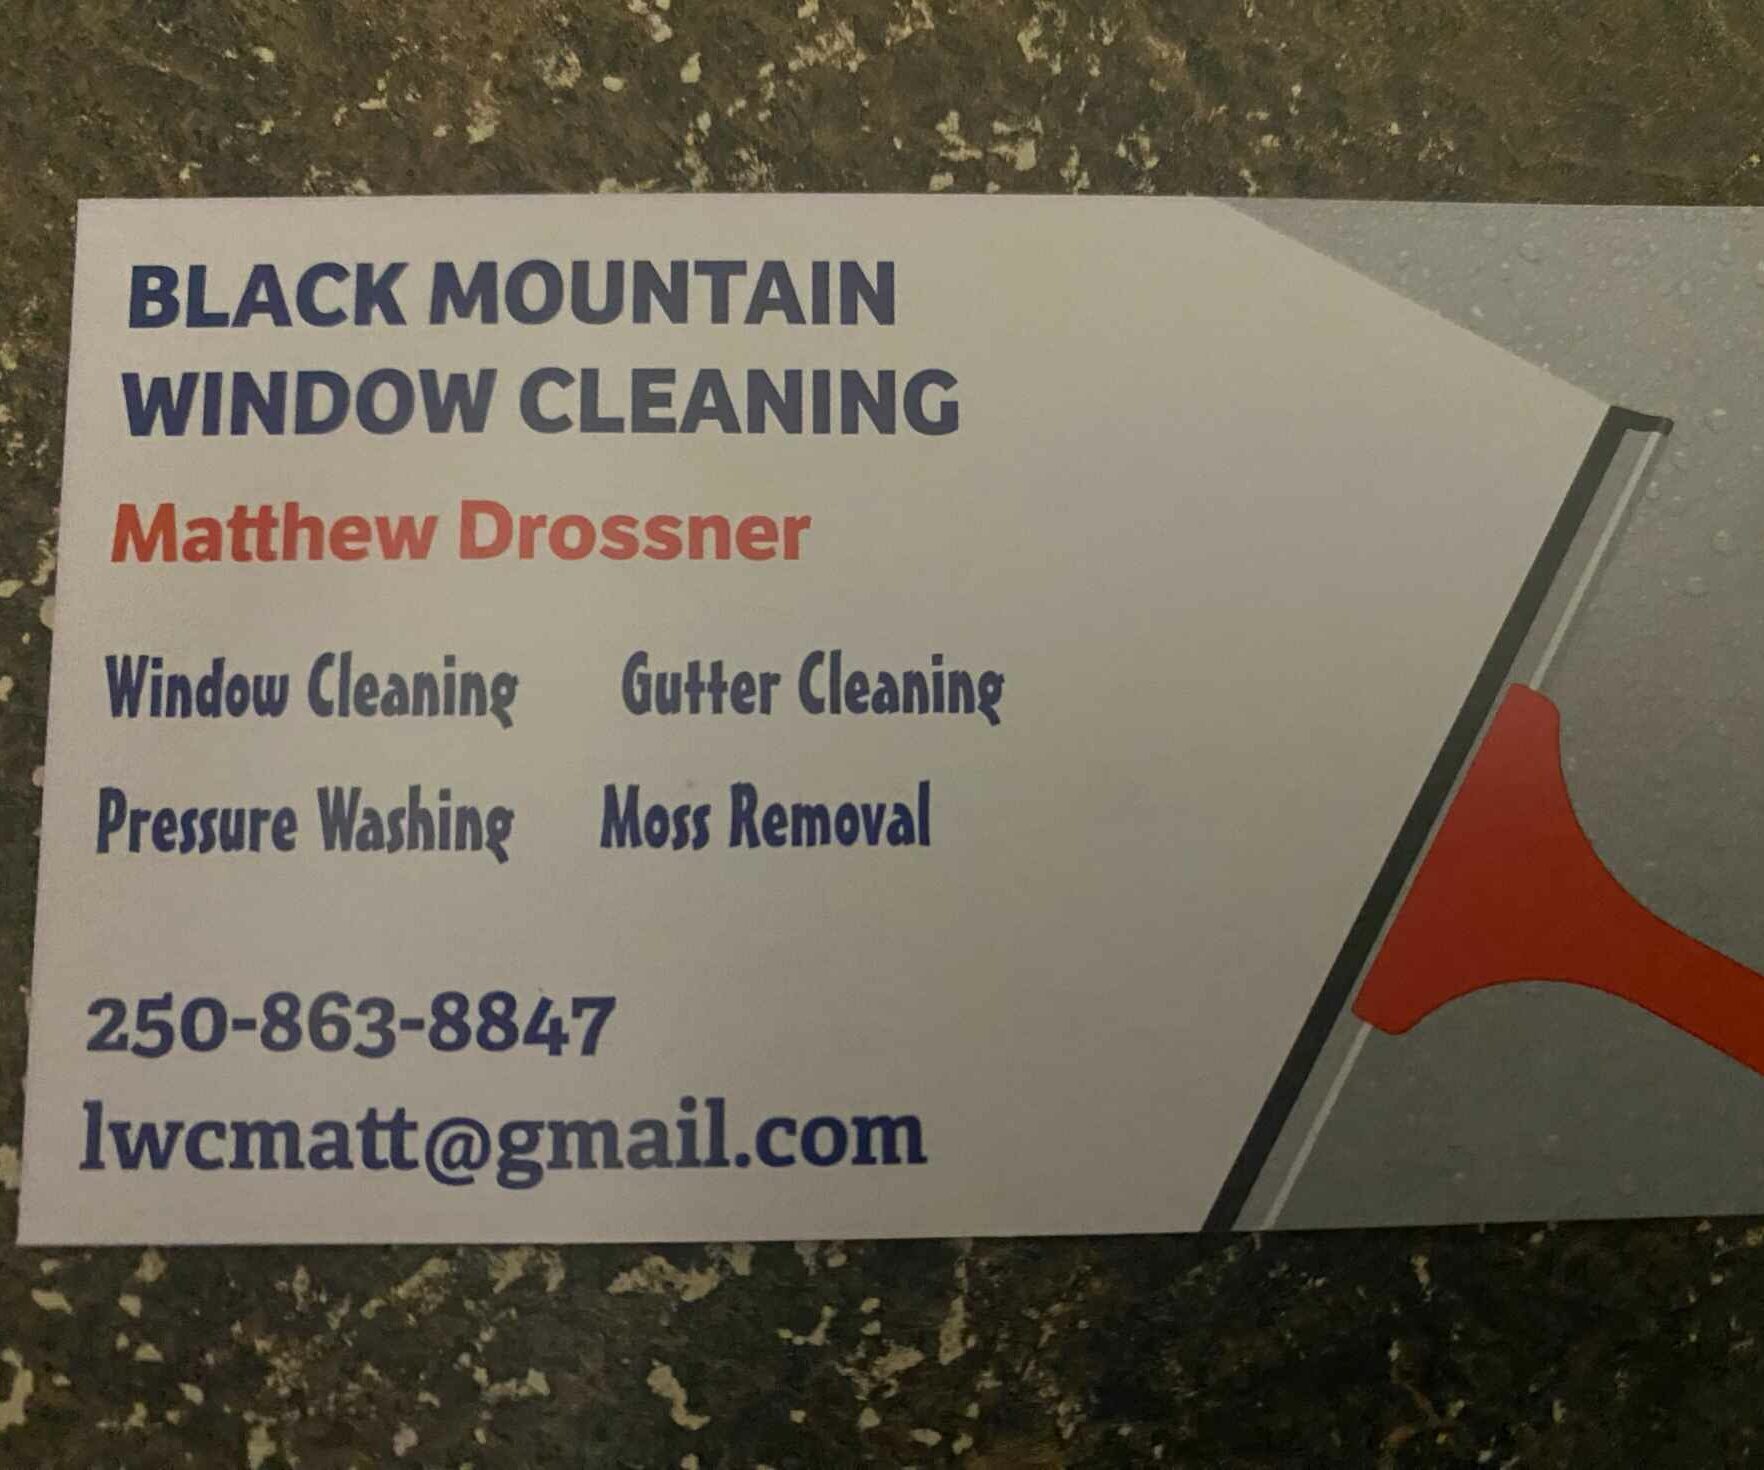 Black Mountain Window Cleaning